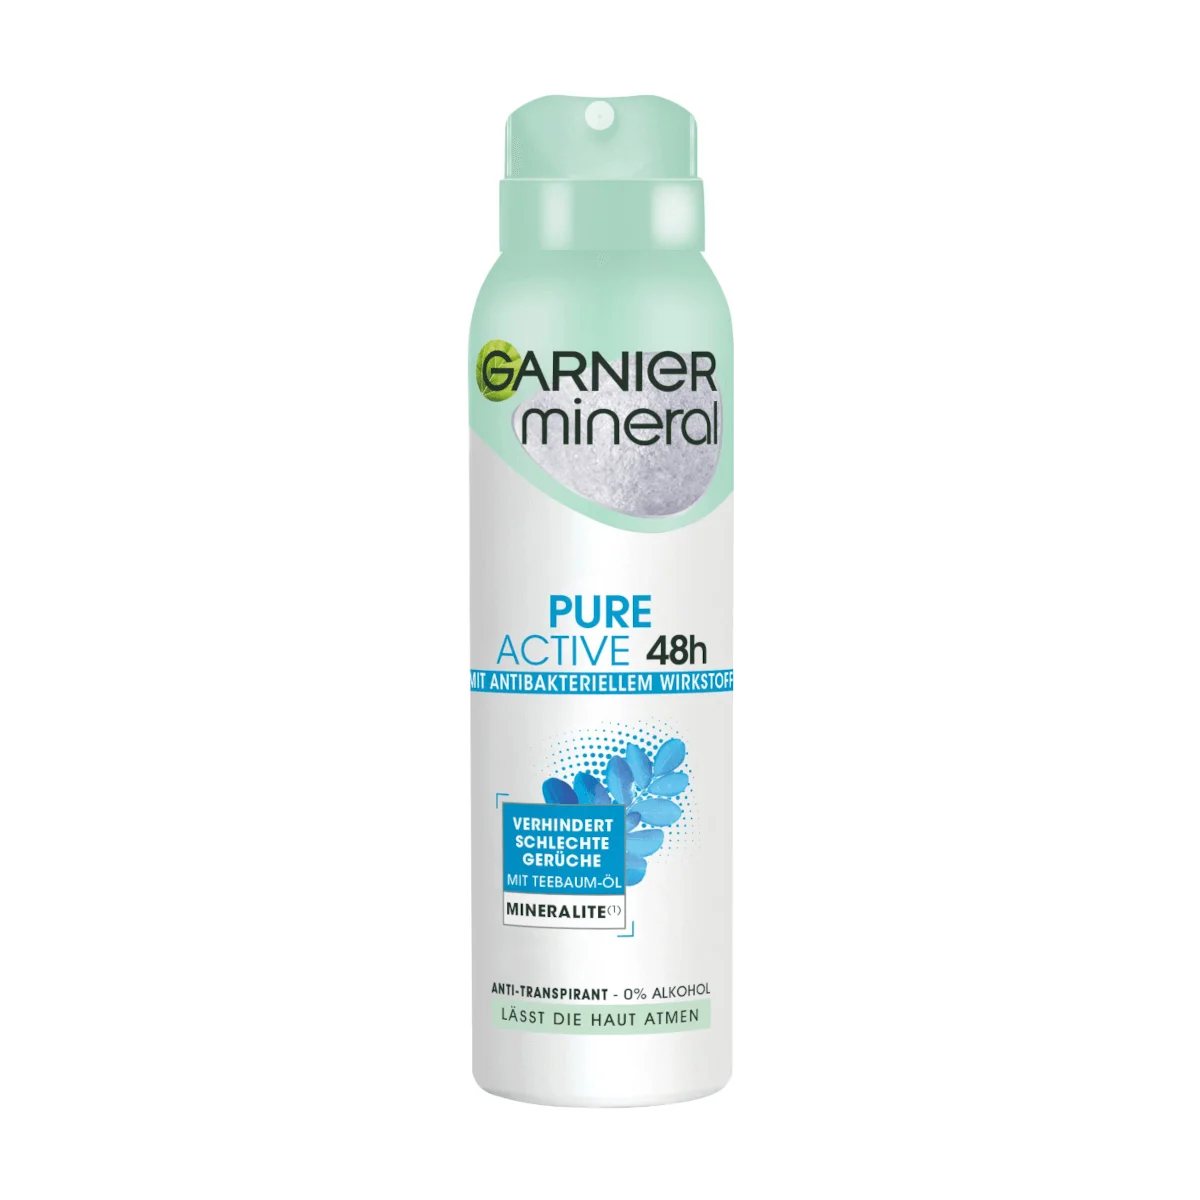 Garnier Deo Spray Mineral Pure Active Antibakteriell | Tagescremes